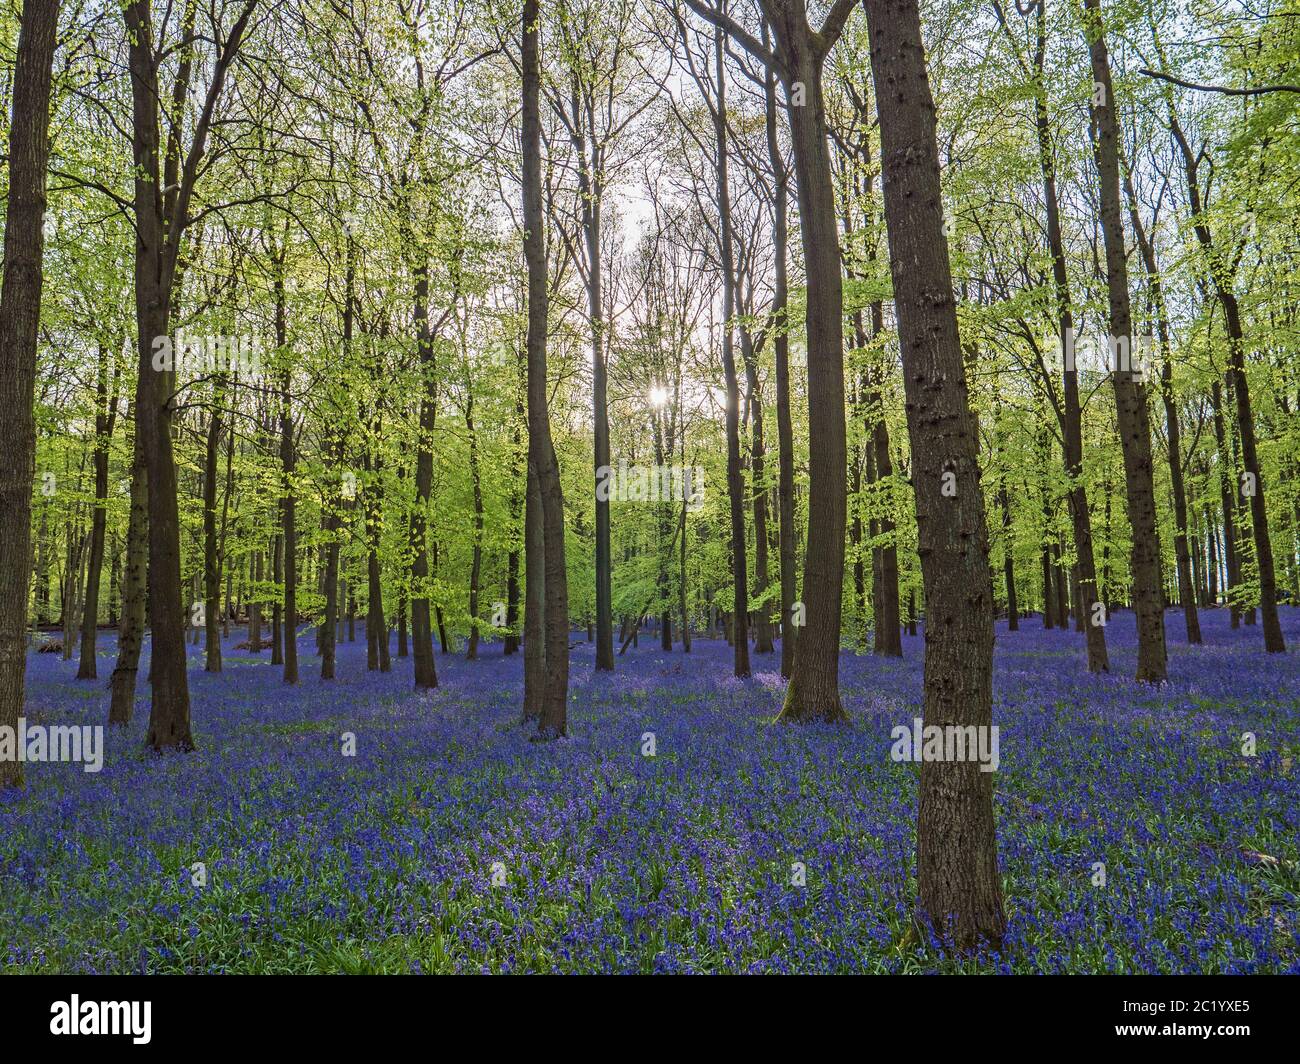 Bluebell Woods Banque D'Images